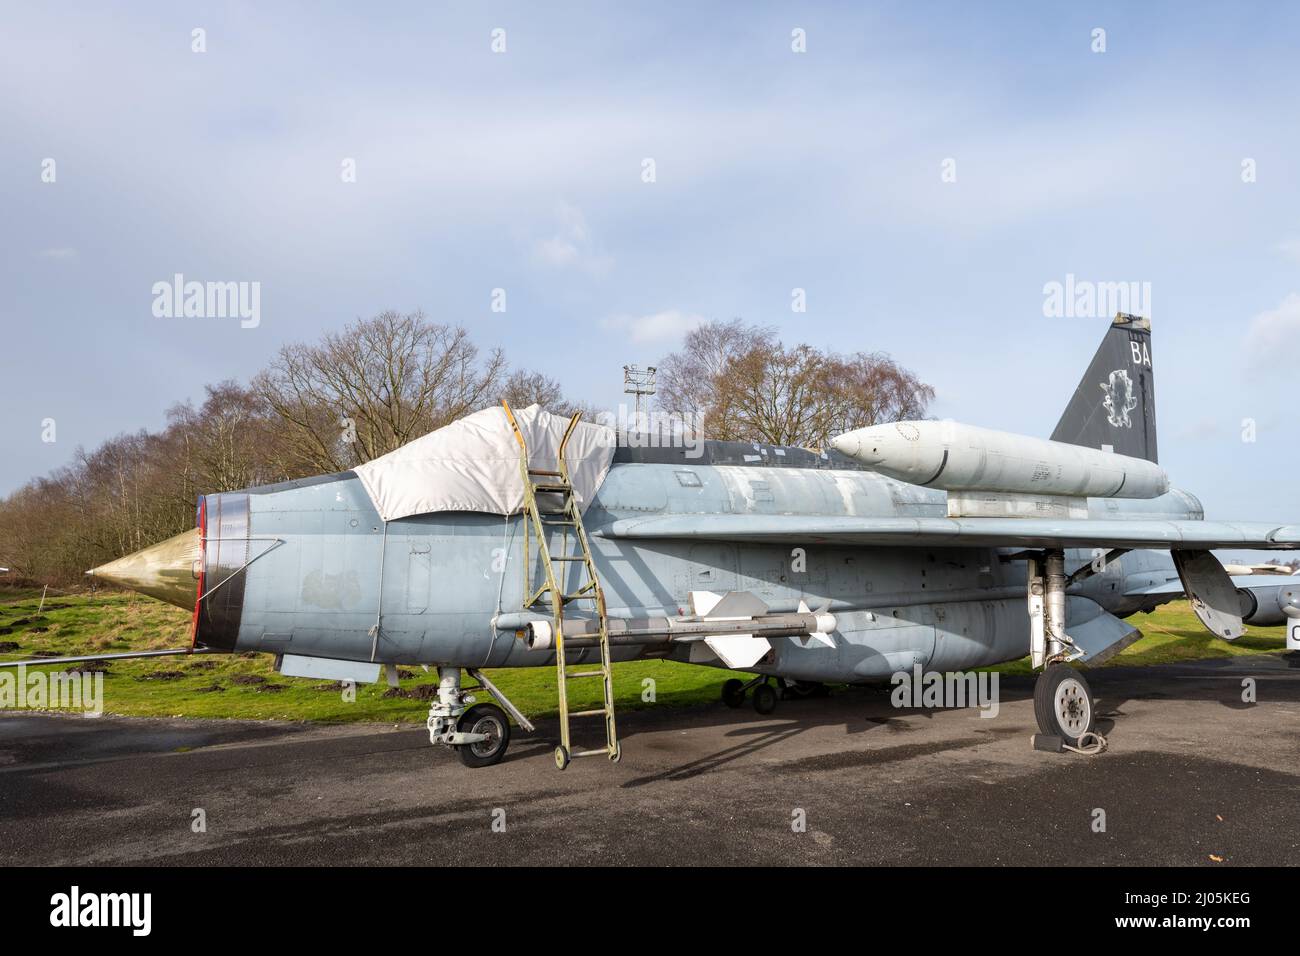 York.Yorkshire.United Kingdom.February 16th 2022.A Lightning F6 fighter plane is on display at the Yorkshire air museum Stock Photo